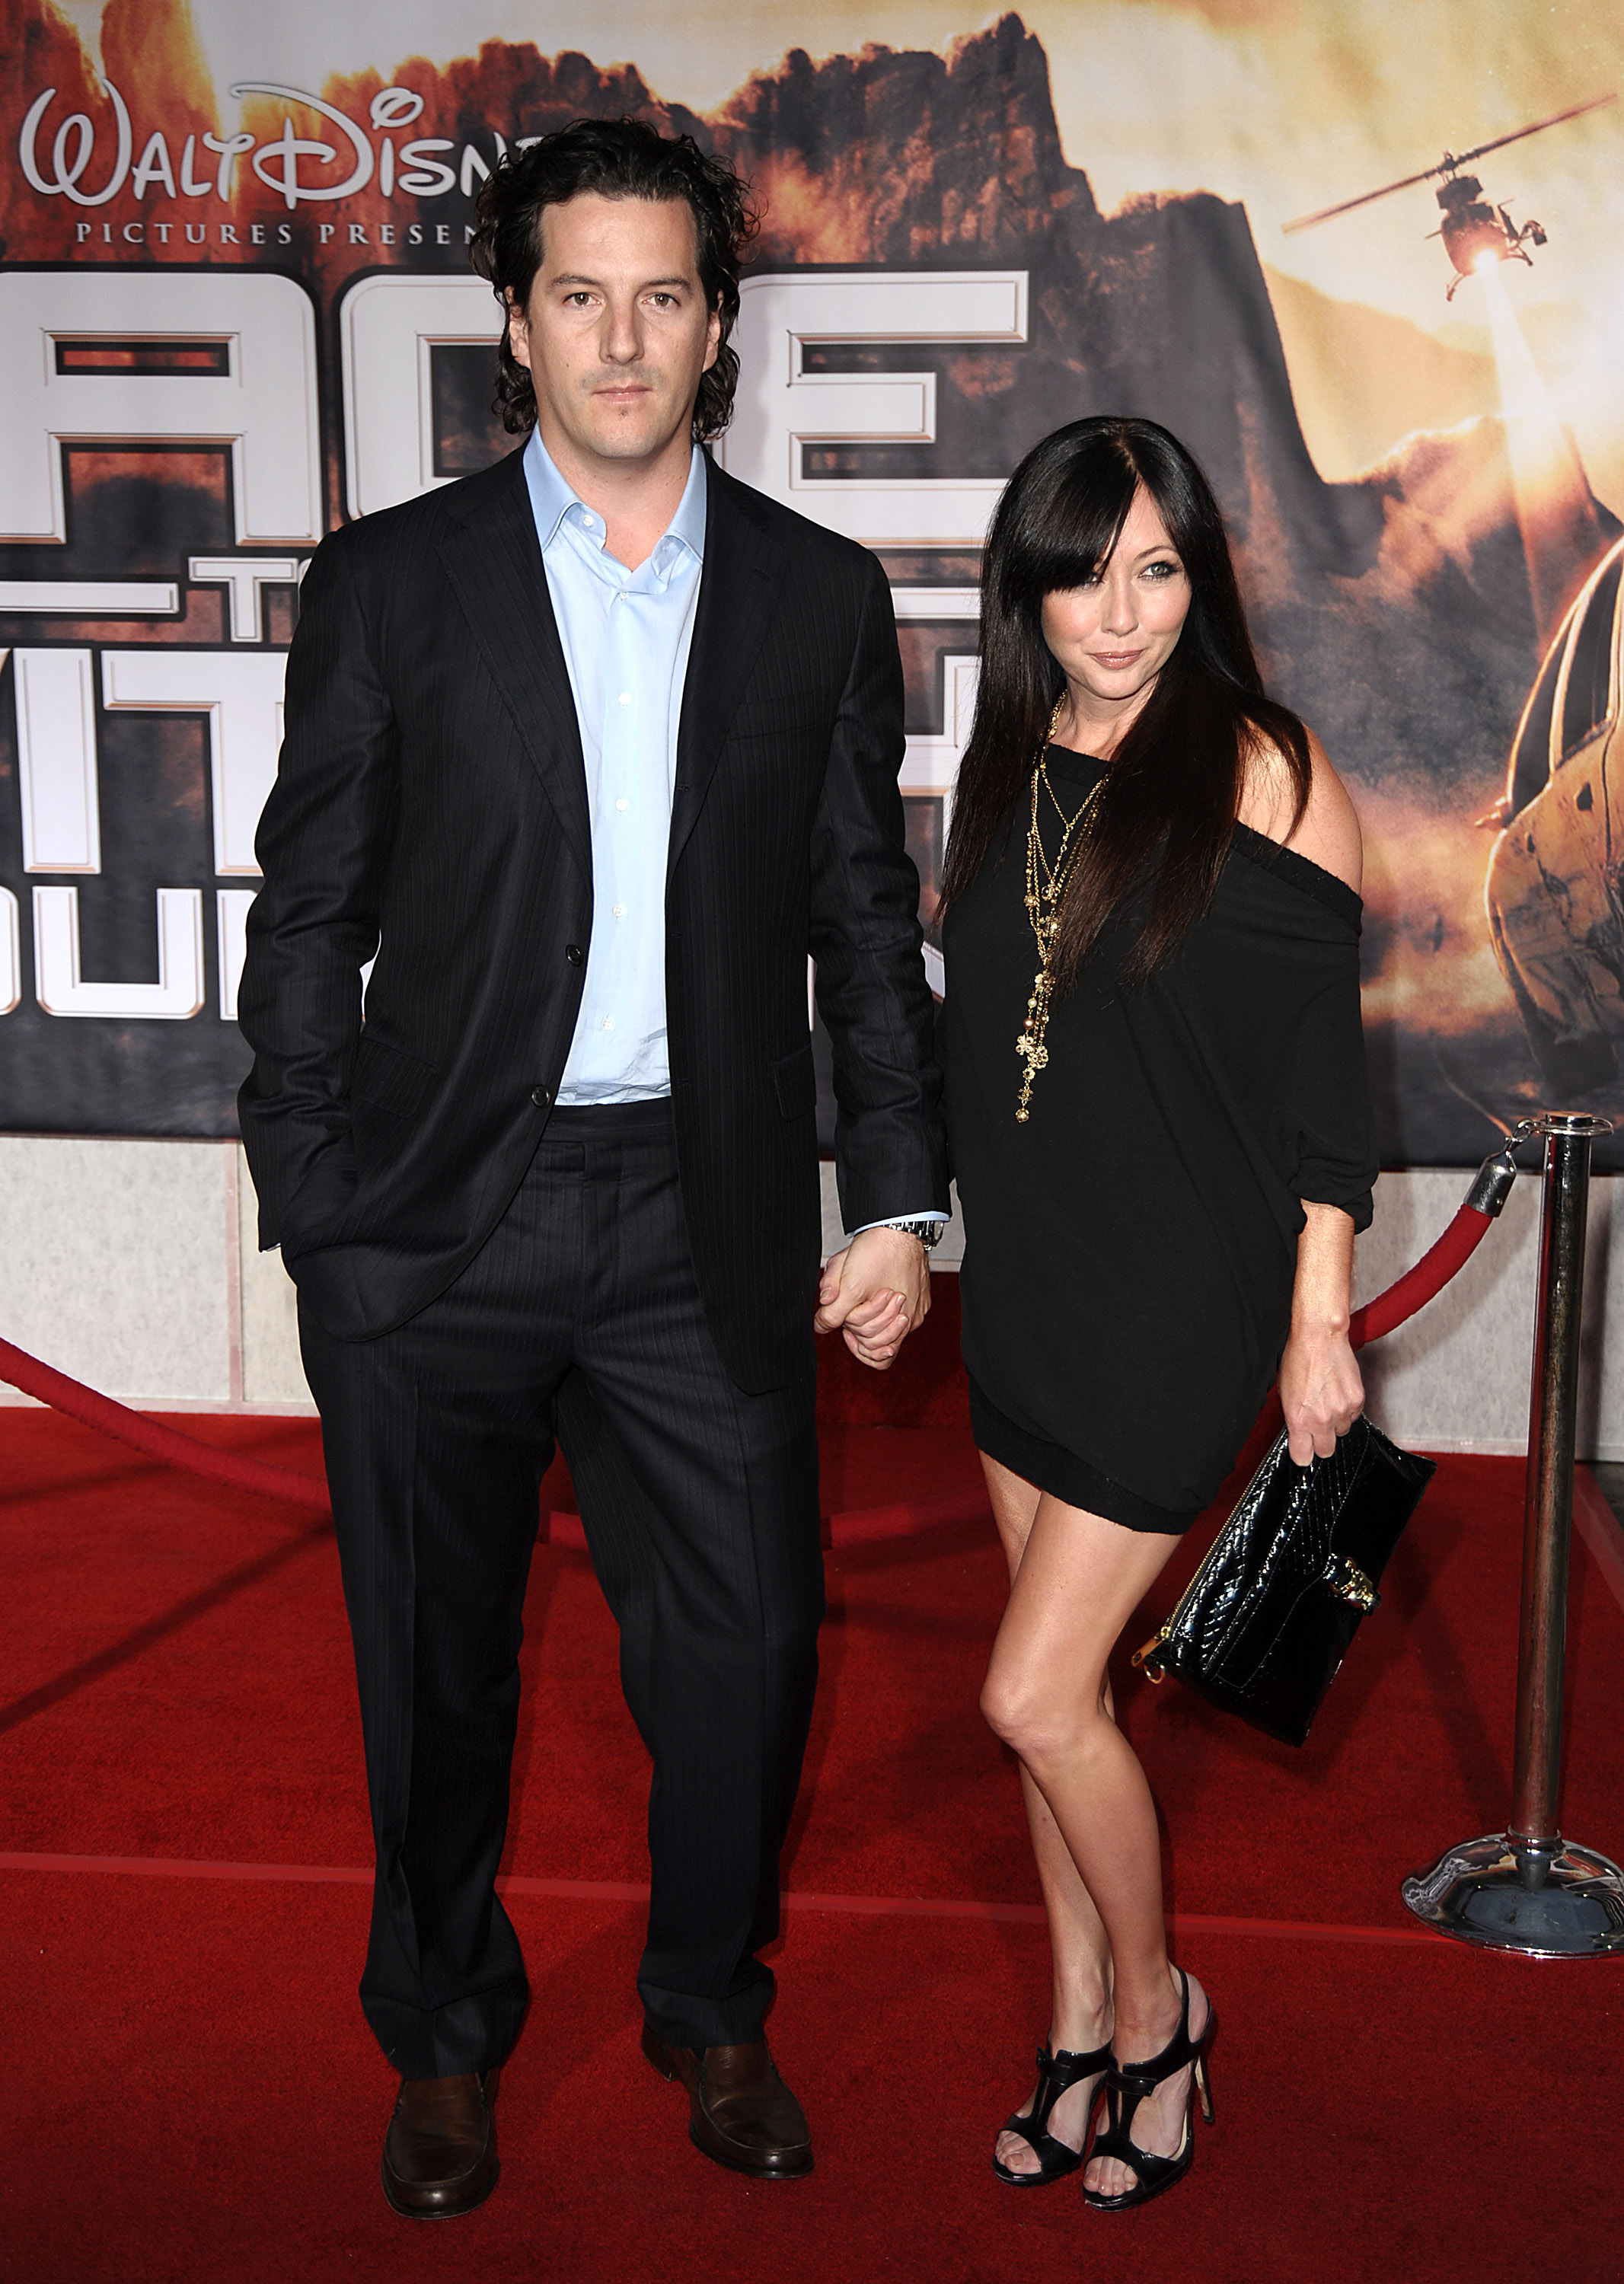 Shannen Doherty and Kurt Iswarienko attend the premiere of "Race to Witch Mountain" at the El Capitan Theatre in Hollywood, California on March 11, 2009. | Source: Getty Images